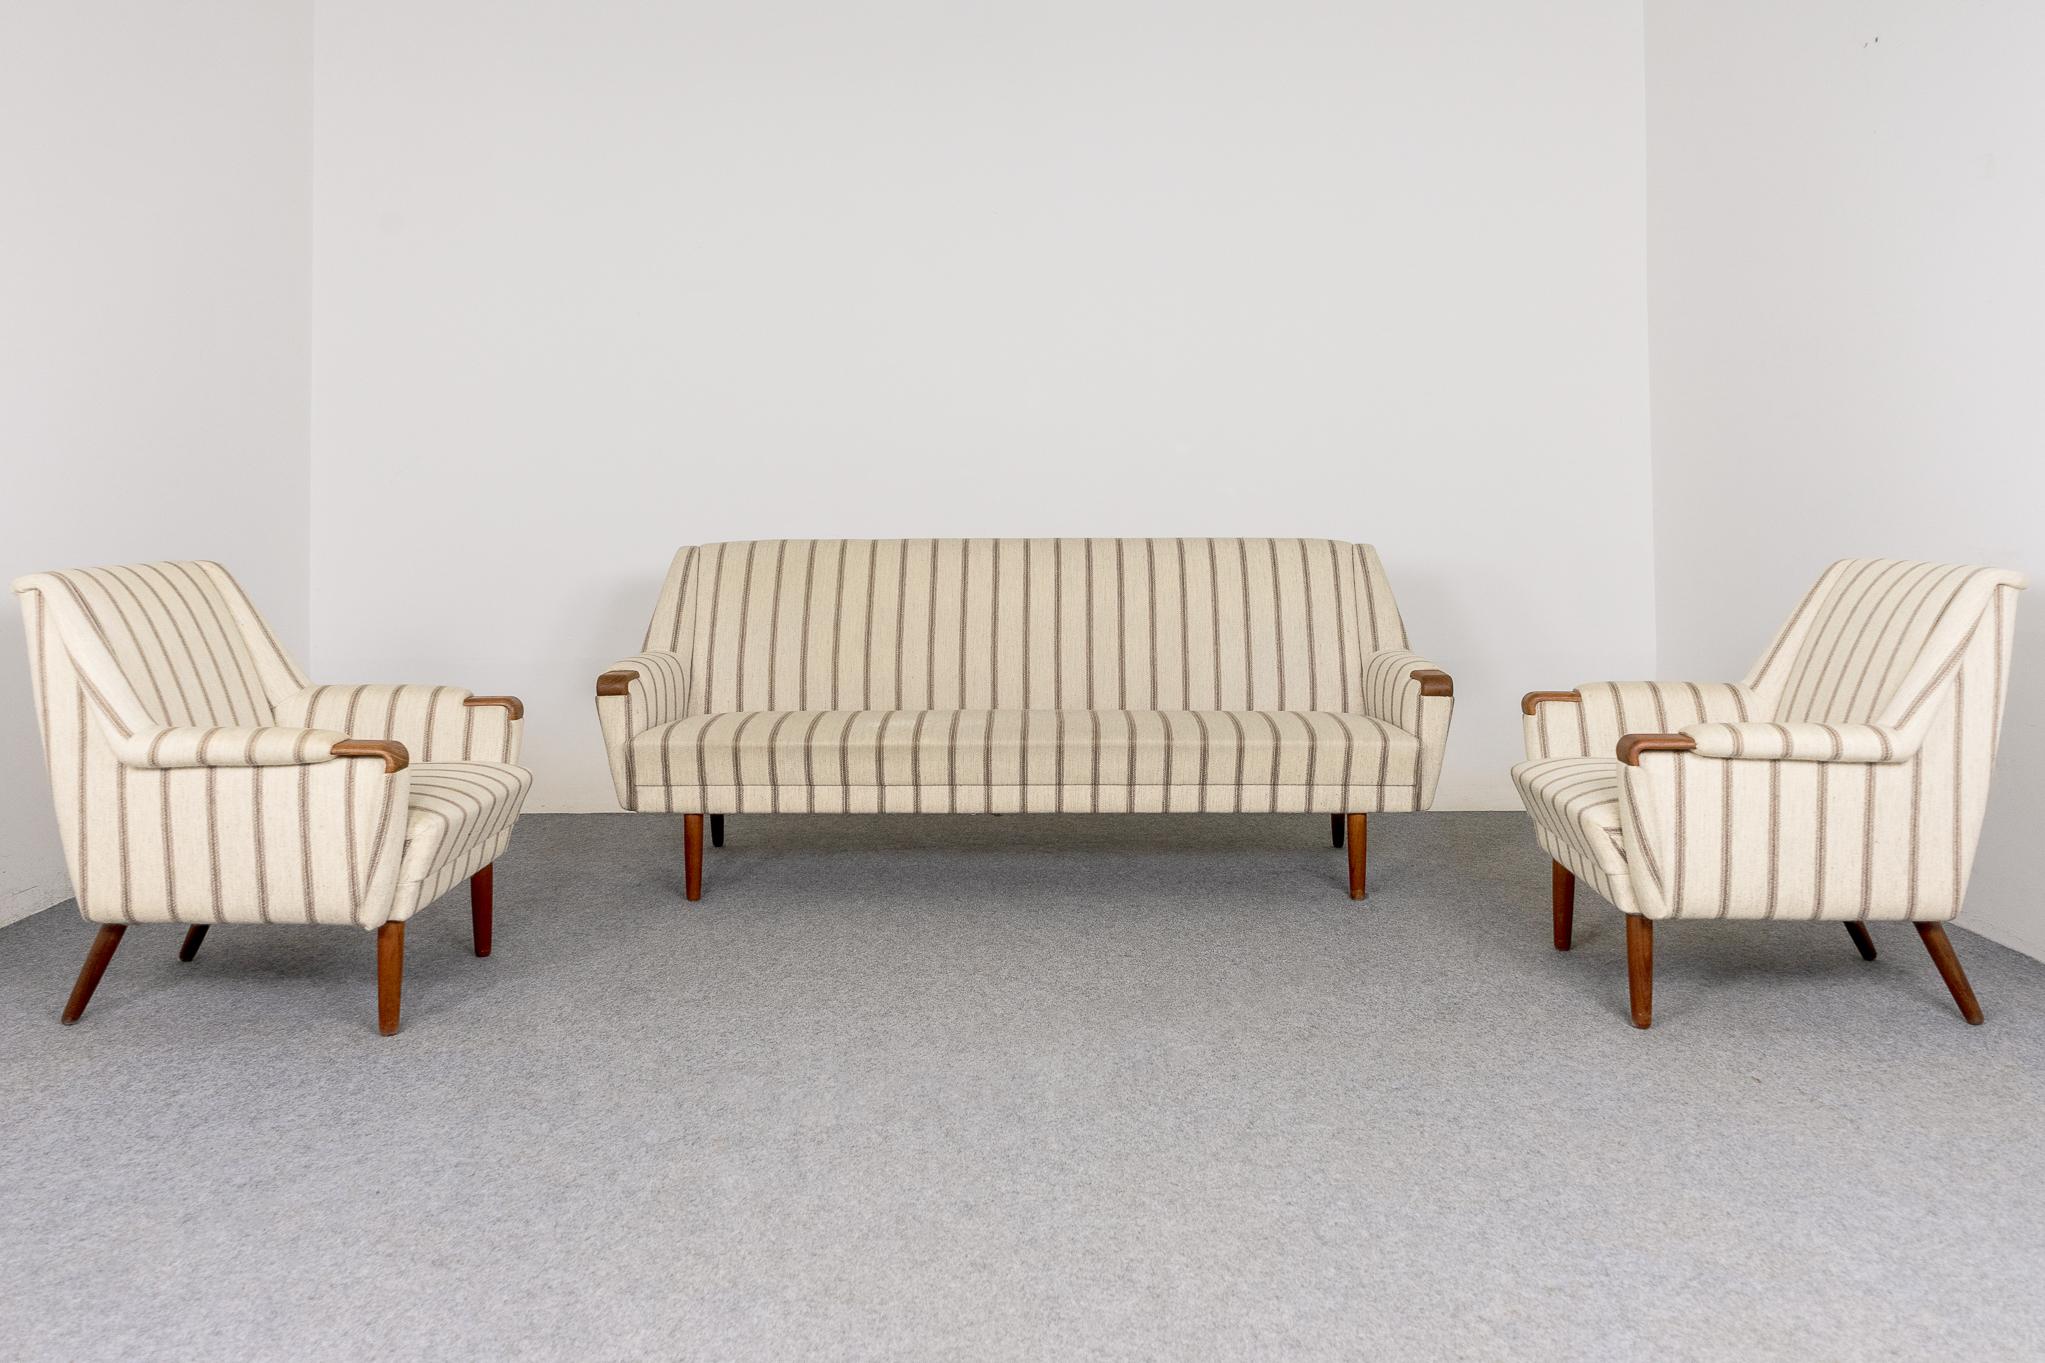 Teak Danish modern three piece set, circa 1960's. Includes, generously sized three seat sofa and two matching loungers. Lovely padded angular arm rests, very comfortable. Original wool striped upholstery, some wear and tear. The solid teak splayed